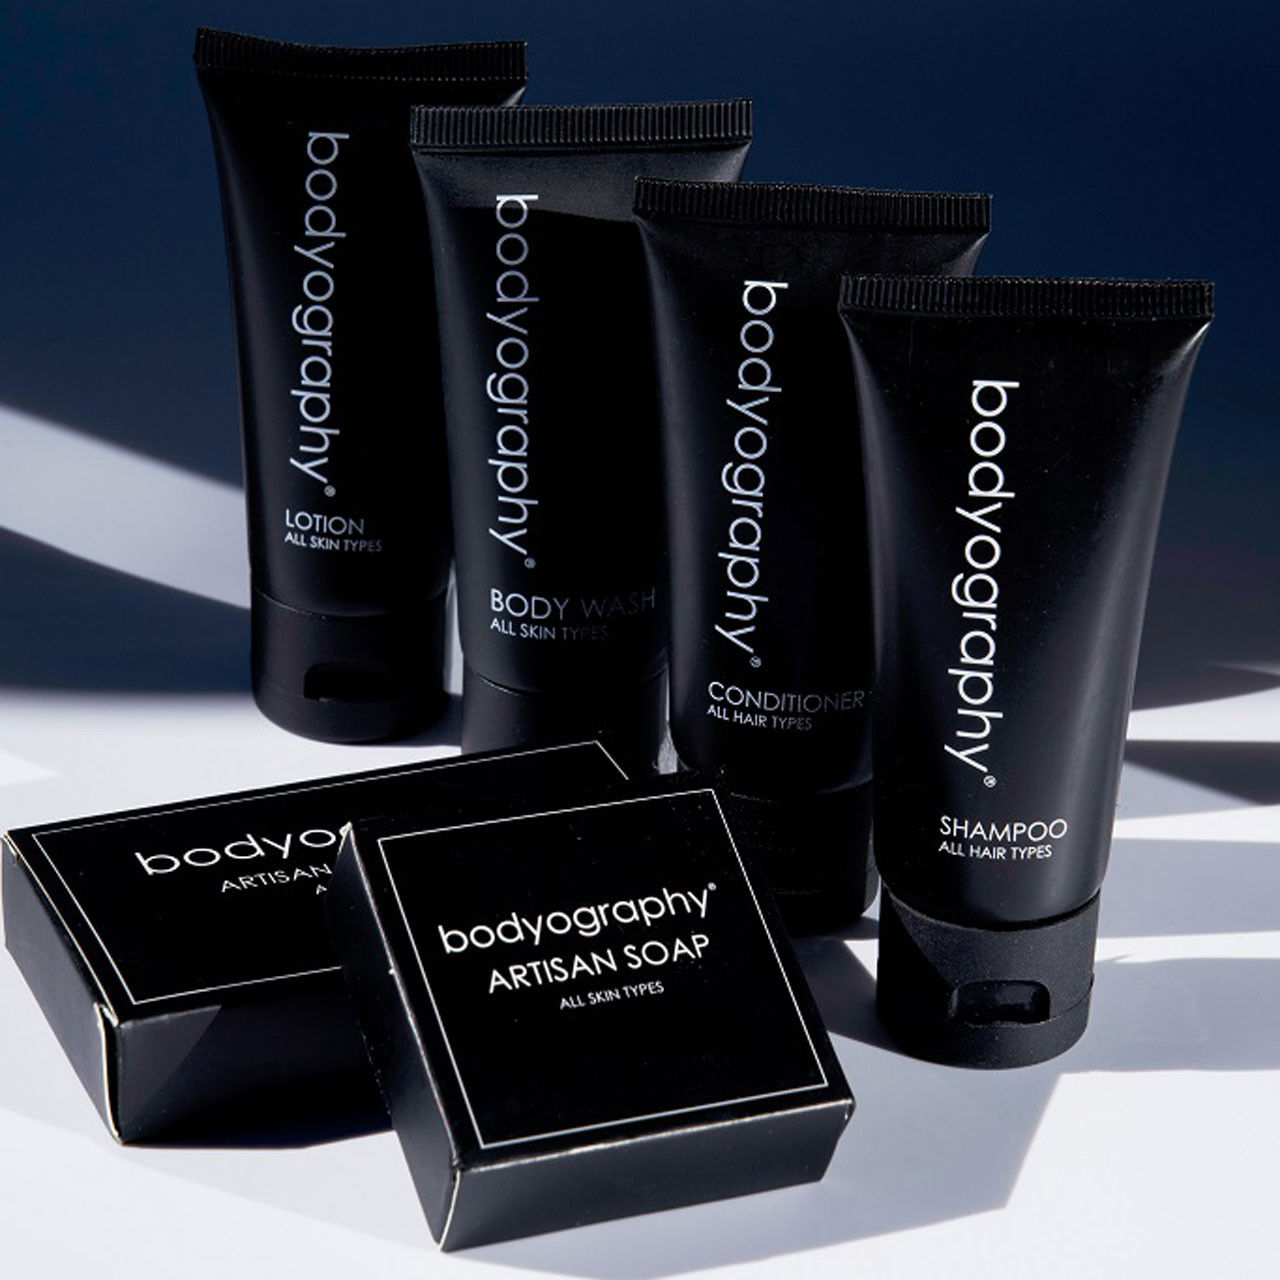 What's the scent of the Bodyography shampoo in the hotel set?